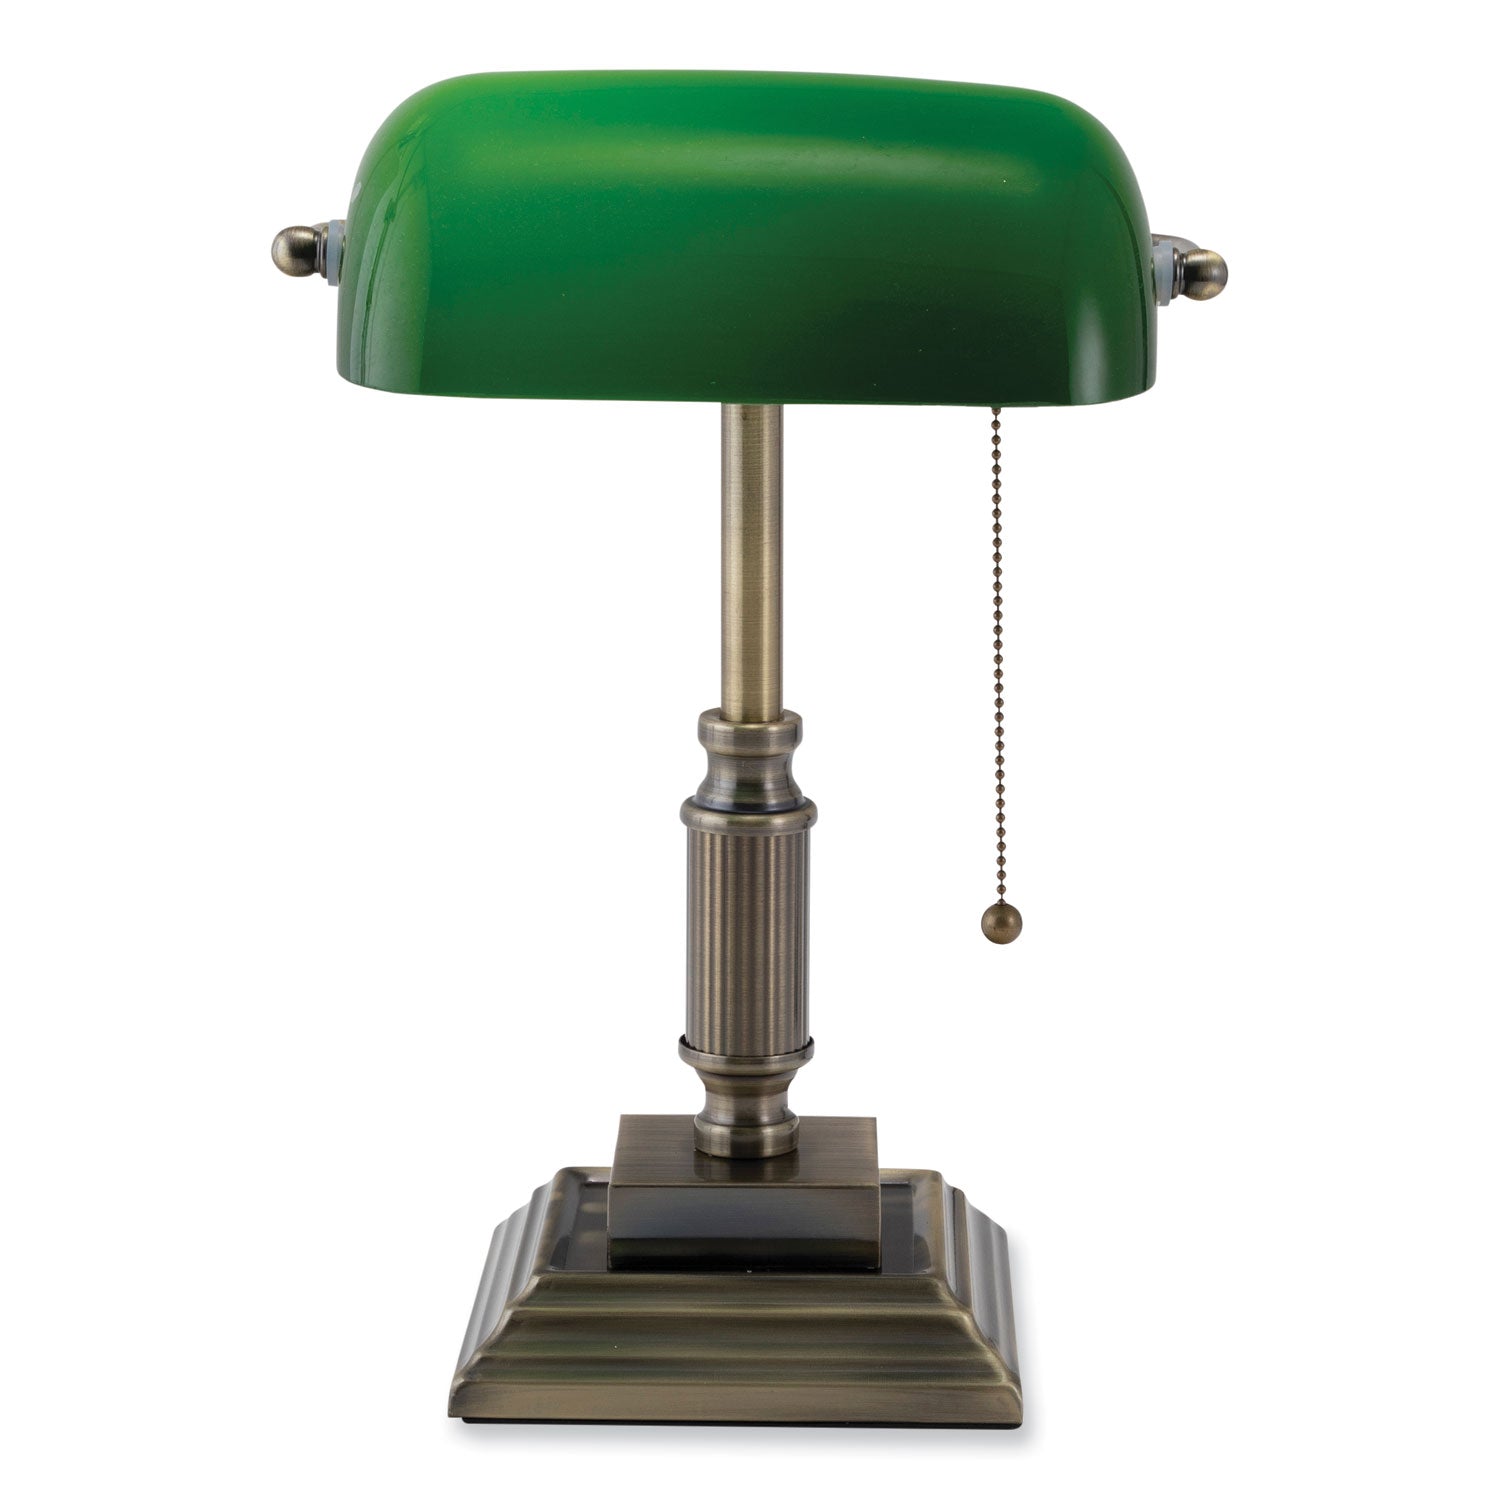 led-bankers-lamp-with-green-shade-candlestick-neck-1475-high-antique-bronze-ships-in-4-6-business-days_vlu9vs688029ab - 1